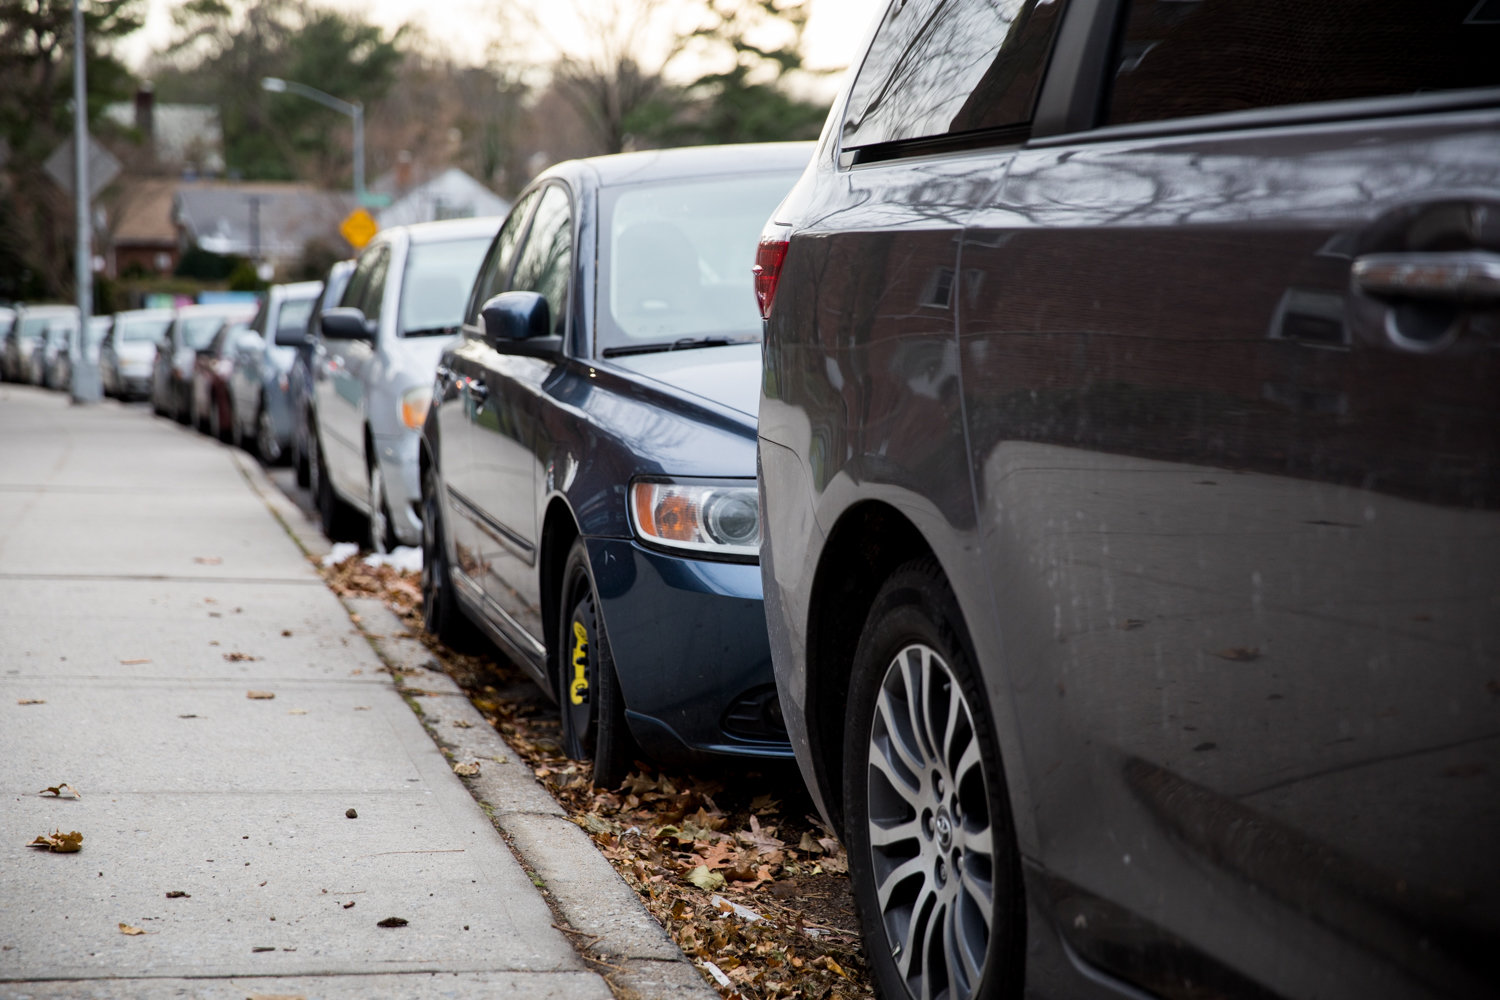 Cars are parked along Arlington Avenue between West 256th and West 259th streets, a stretch of road that can be occasionally difficult for finding a spot to leave your car behind.